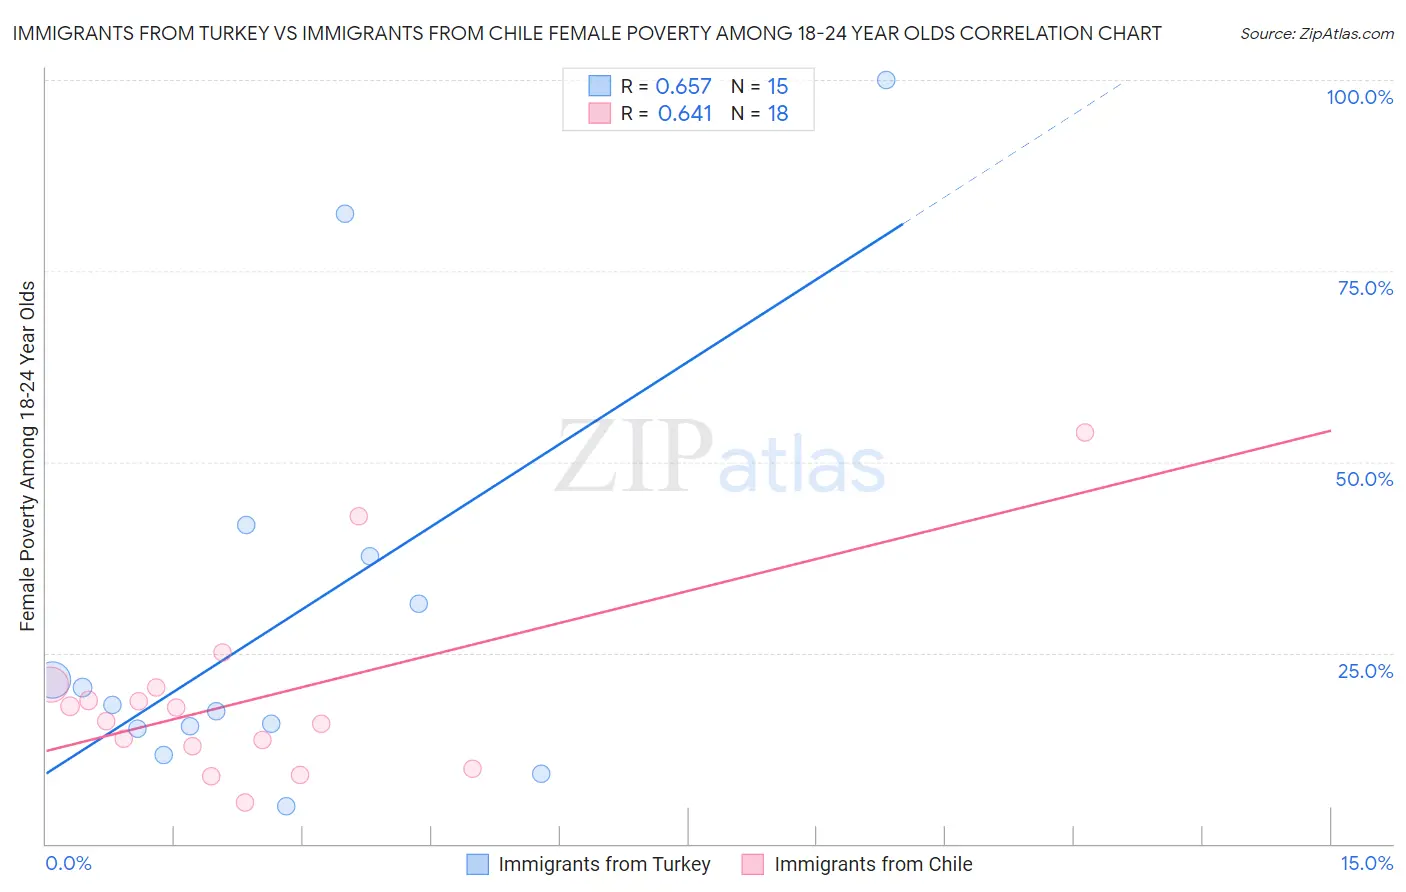 Immigrants from Turkey vs Immigrants from Chile Female Poverty Among 18-24 Year Olds